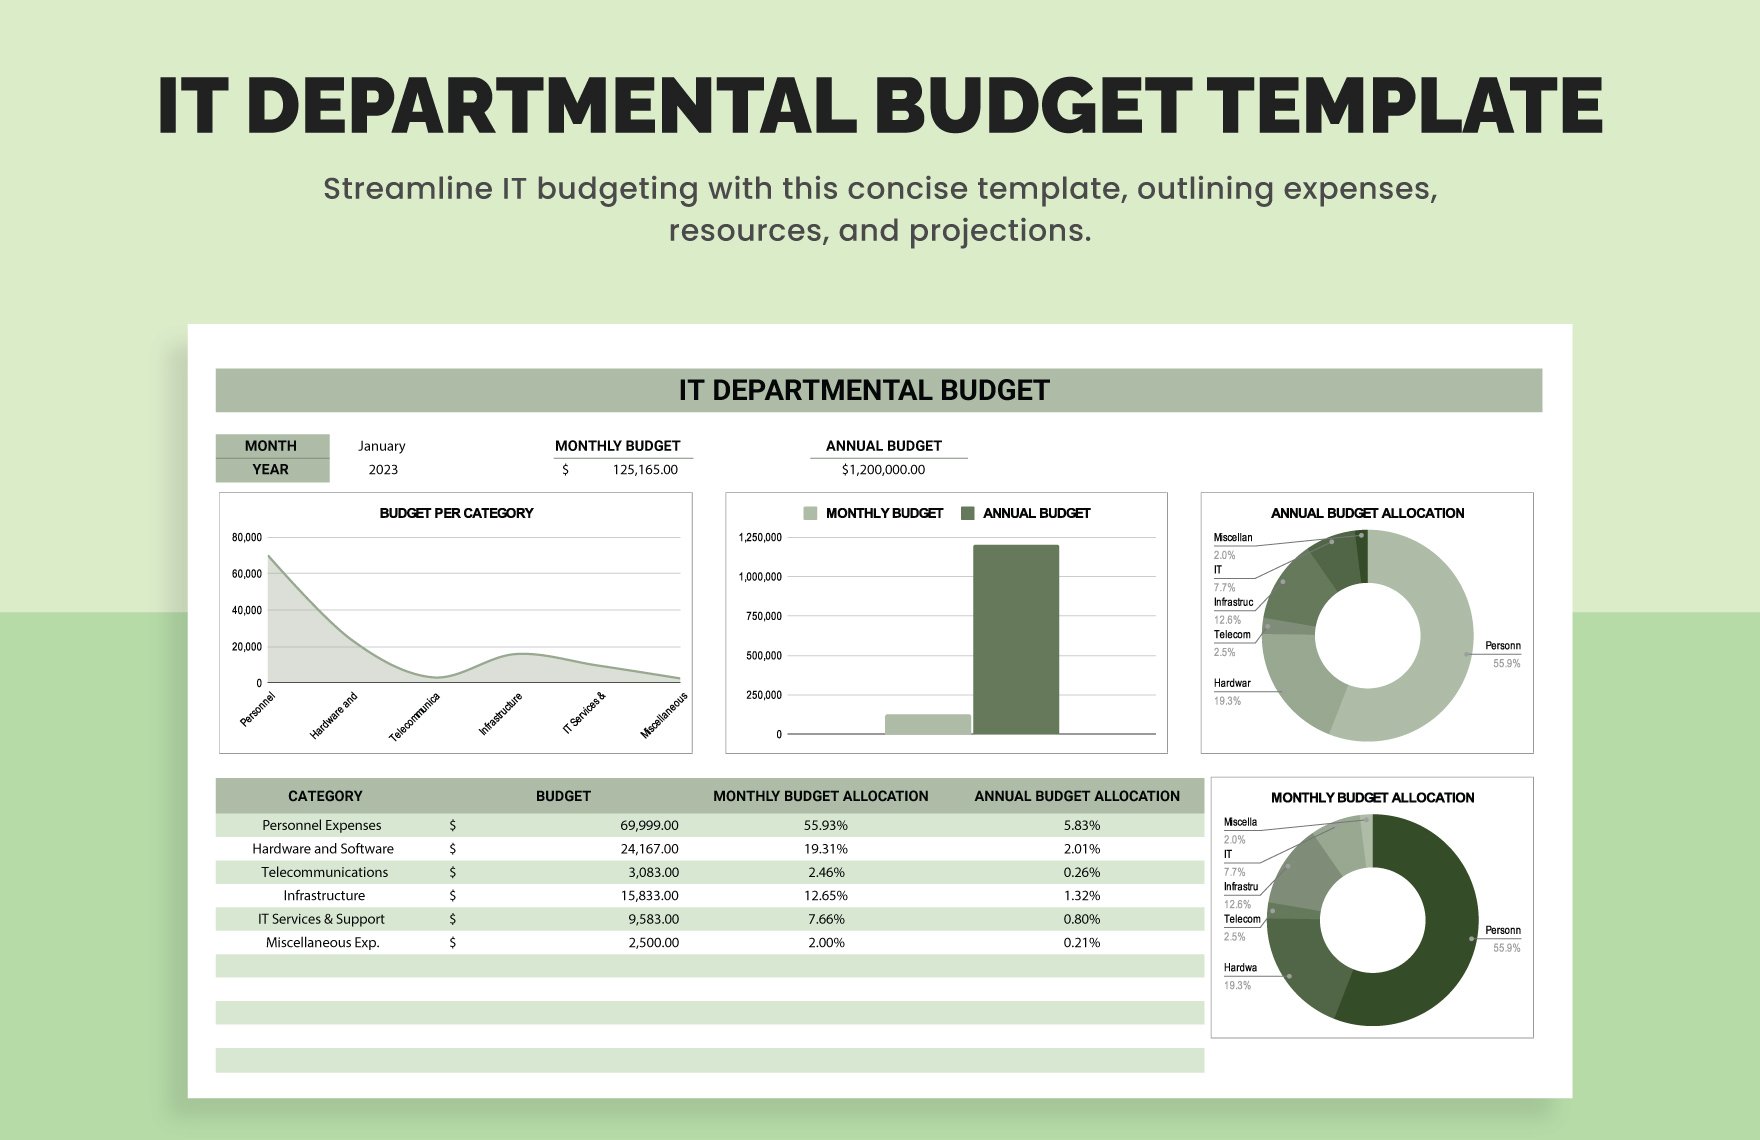 IT Departmental Budget Template in Excel, Google Sheets